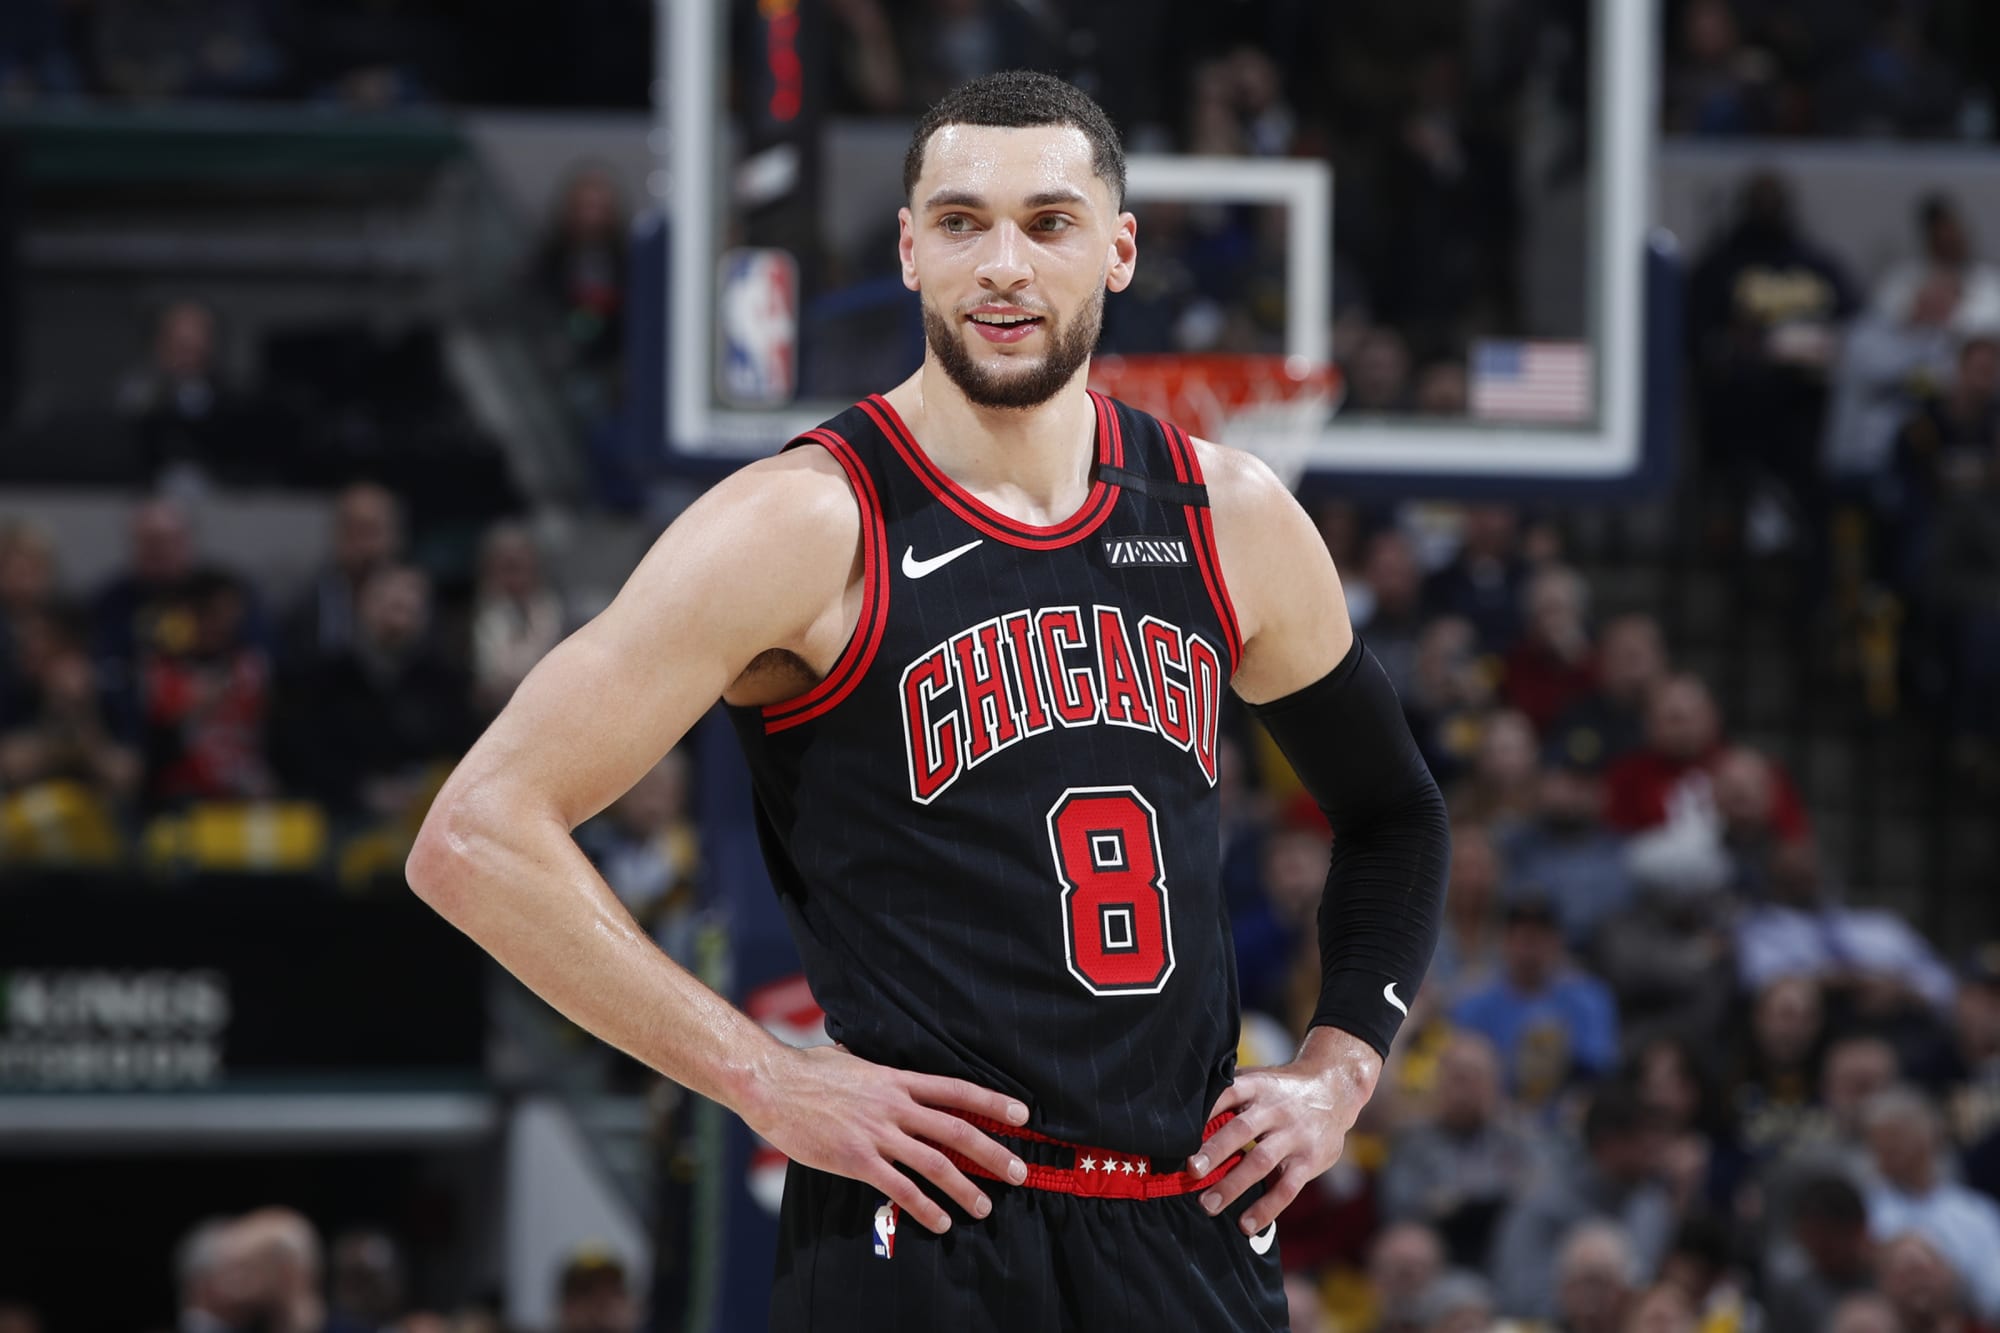 Chicago Bulls: Zach LaVine says “I Want to Stay in Chicago”